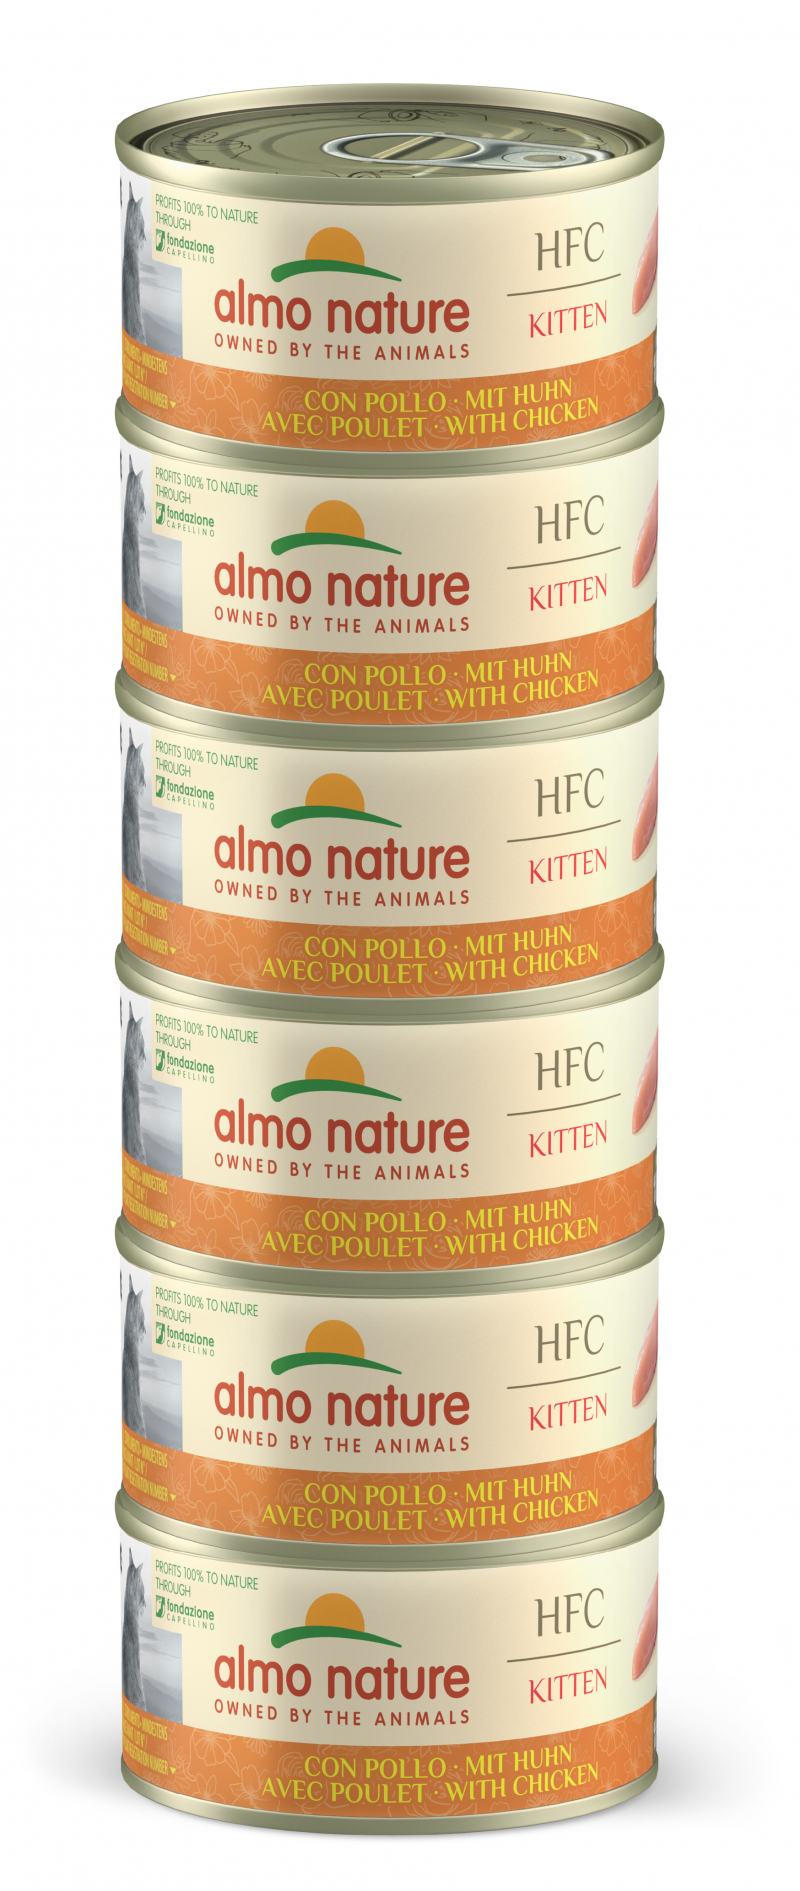 ALMO NATURE Multipack HFC Kitten pour chaton 6x70g